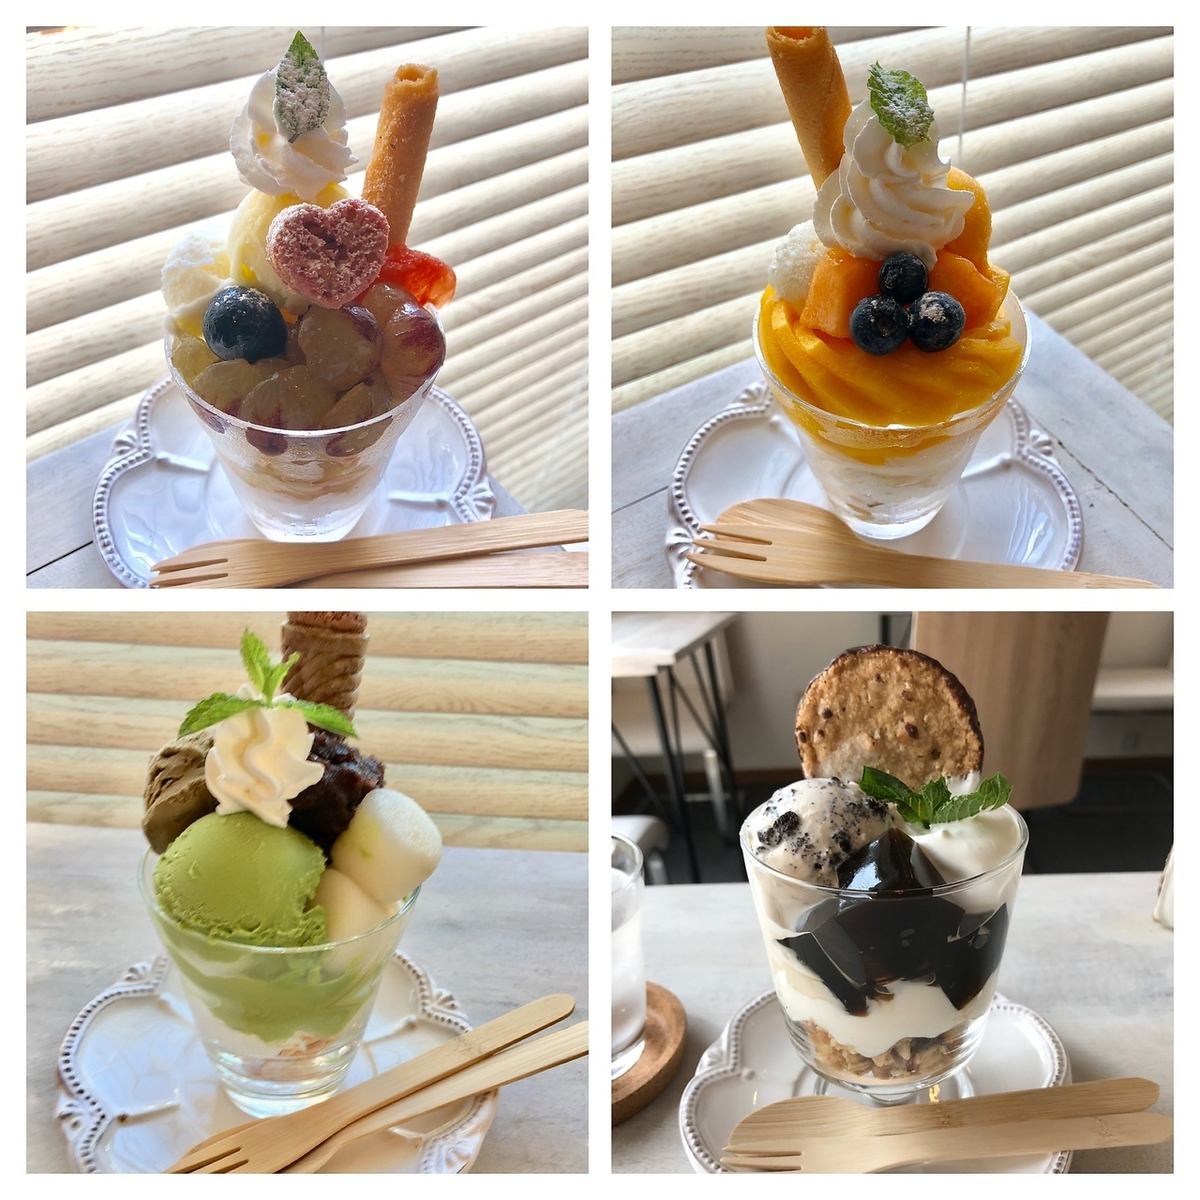 At our shop, you can enjoy a course meal that combines homemade pasta and parfait ♪